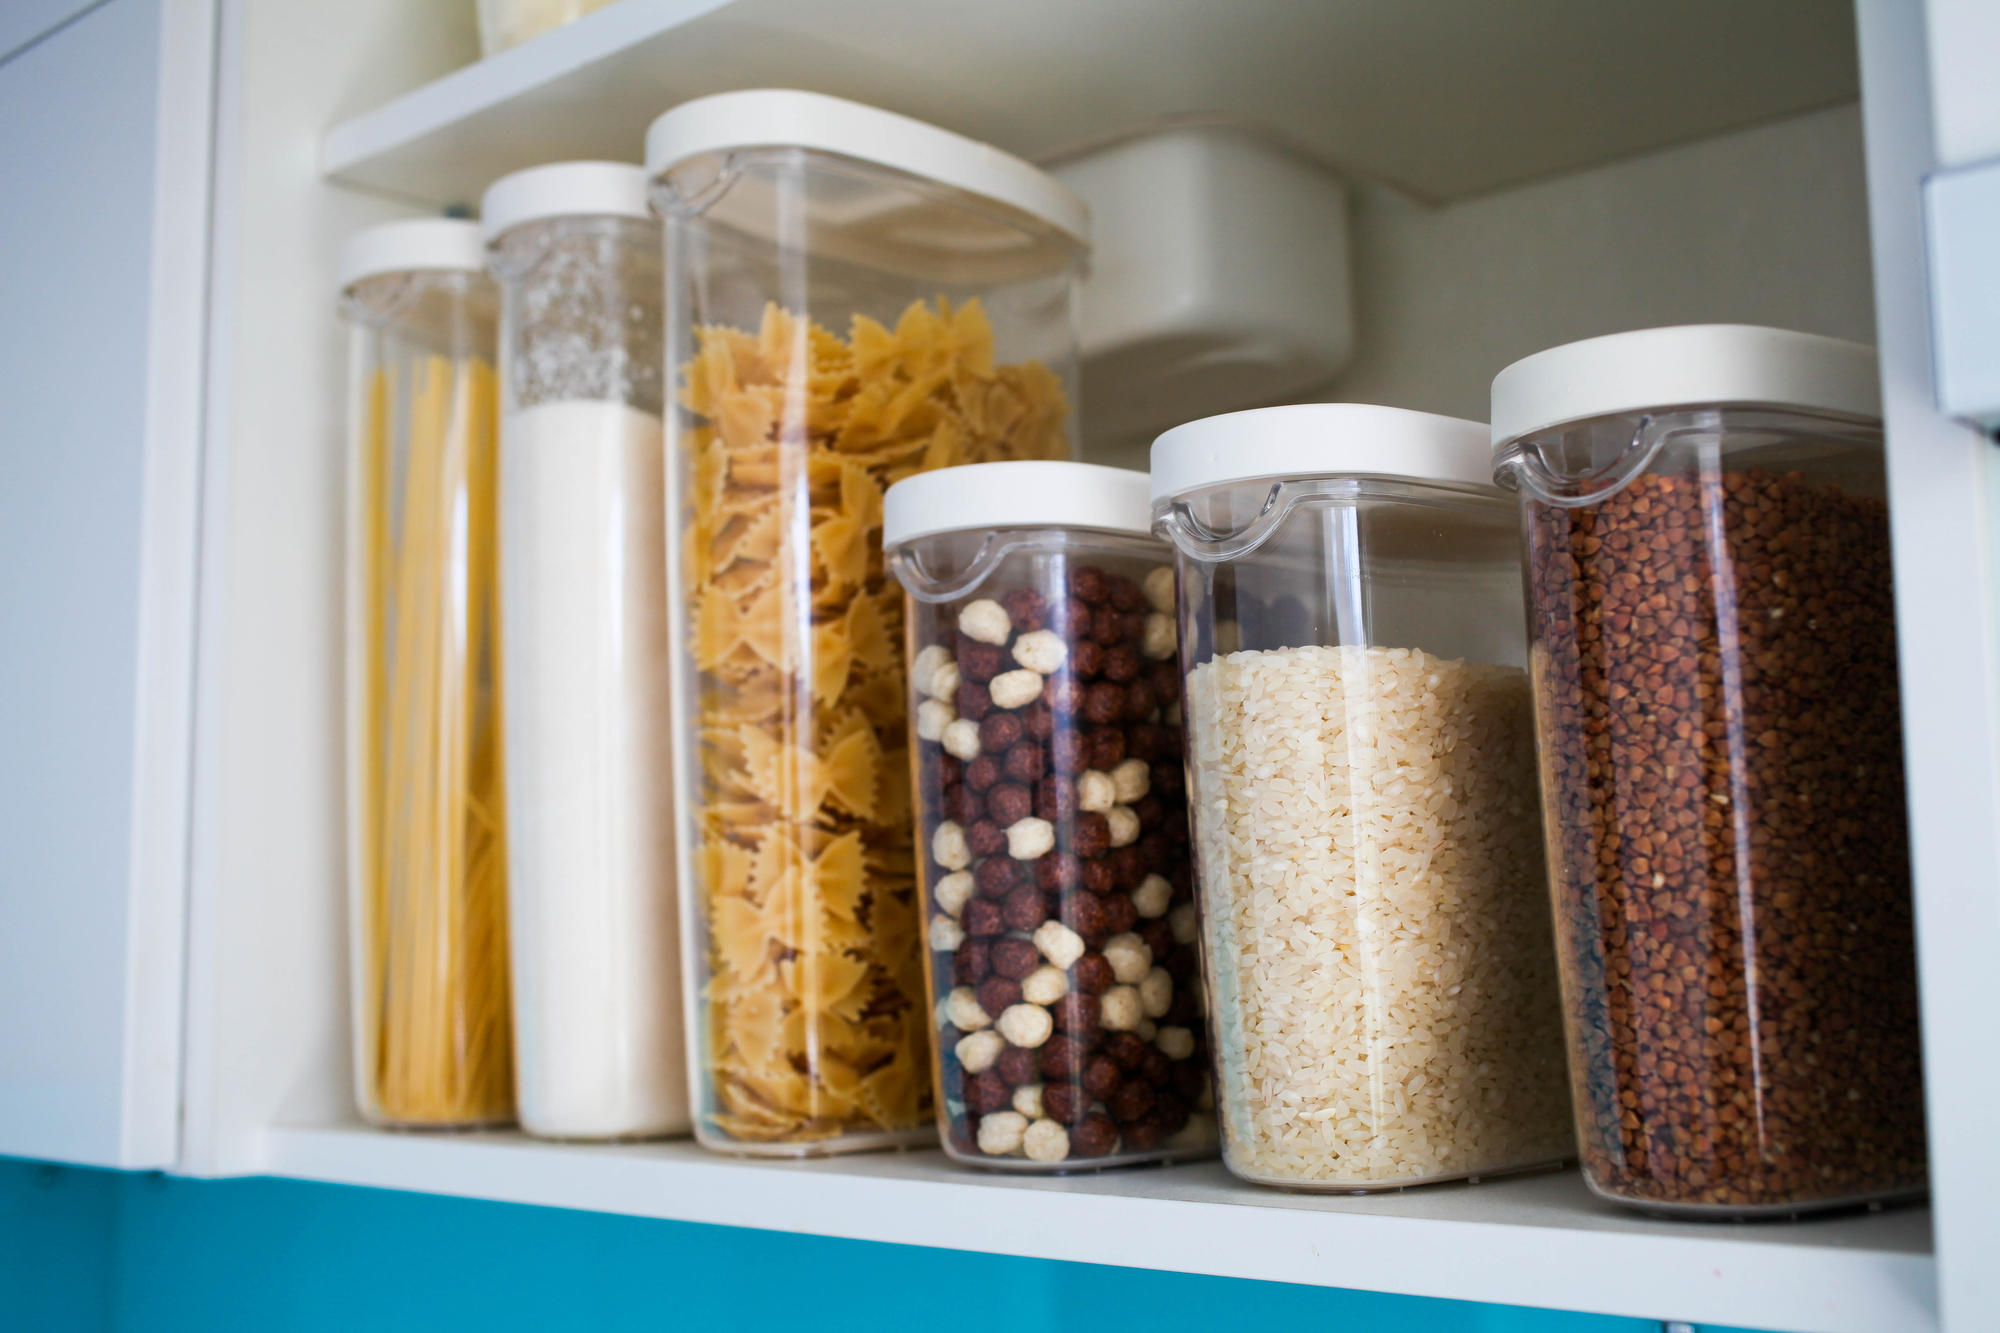 Plastic air-tights containers in a pantry containing rice, pasta, flour, and cereal.